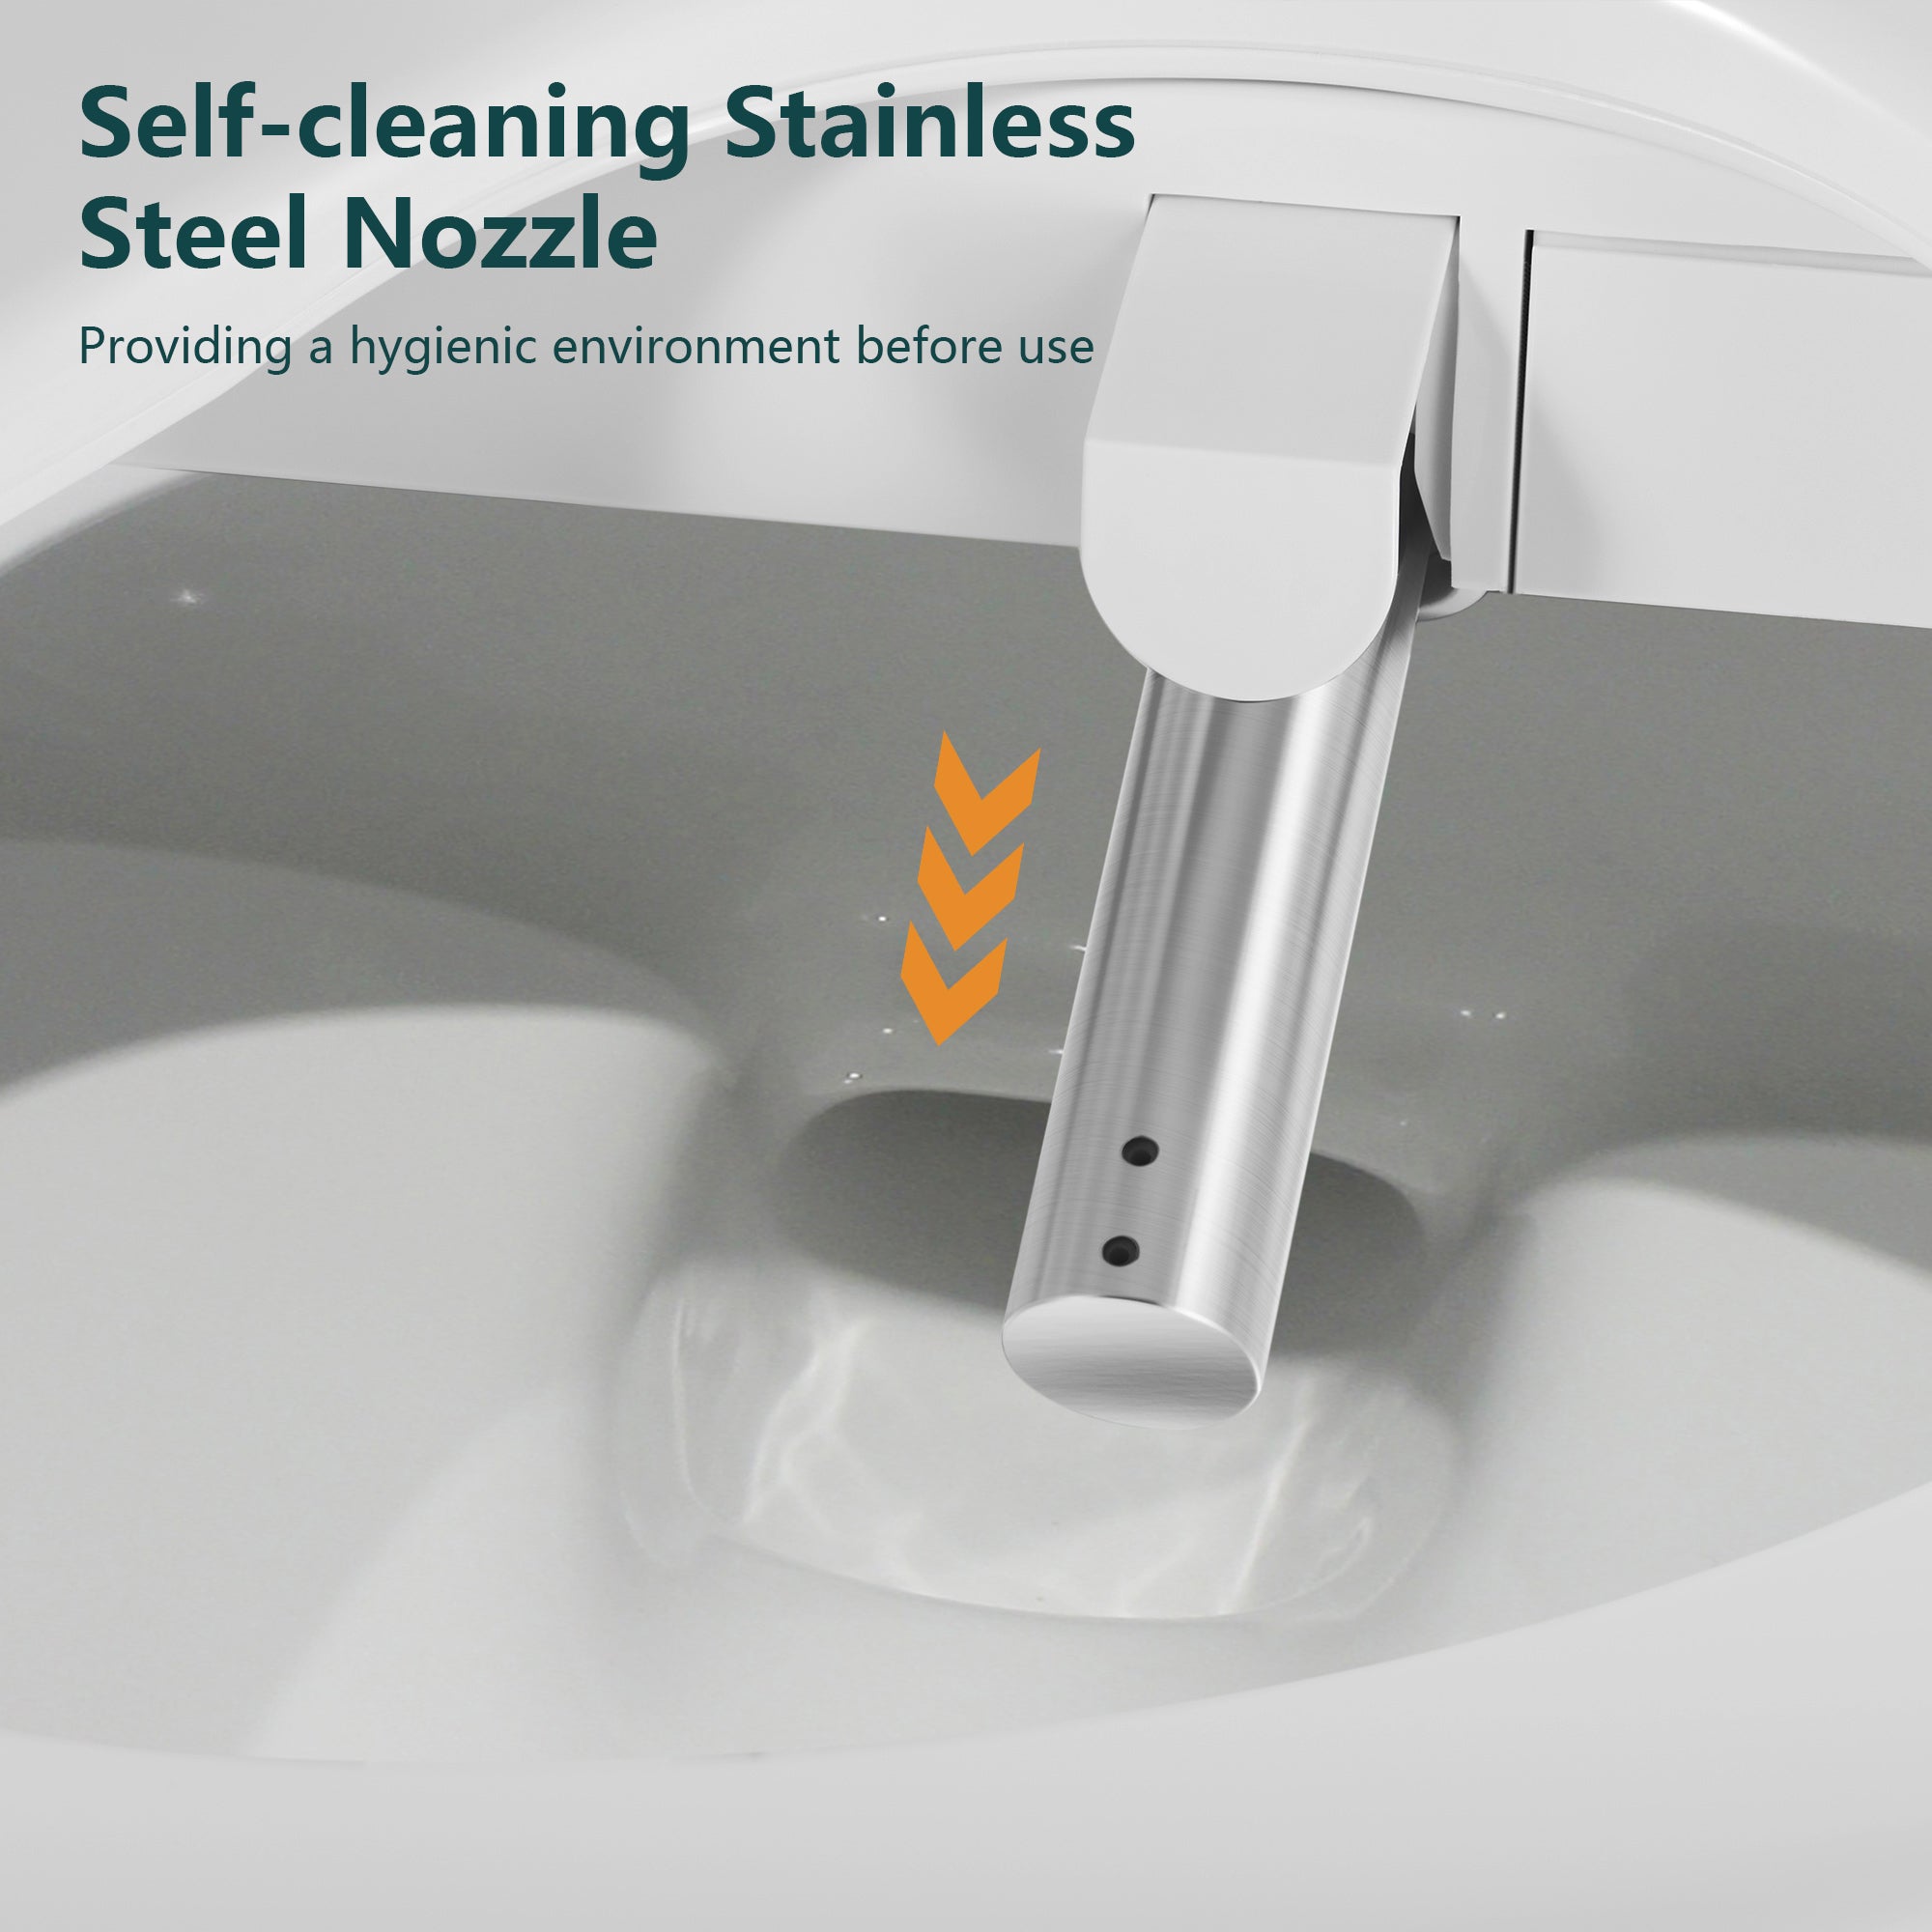 Electronic Heated Bidet Toilet Seat Elongated with Self-Cleaning Nozzle, Warm Air Dryer and Temperature Controlled